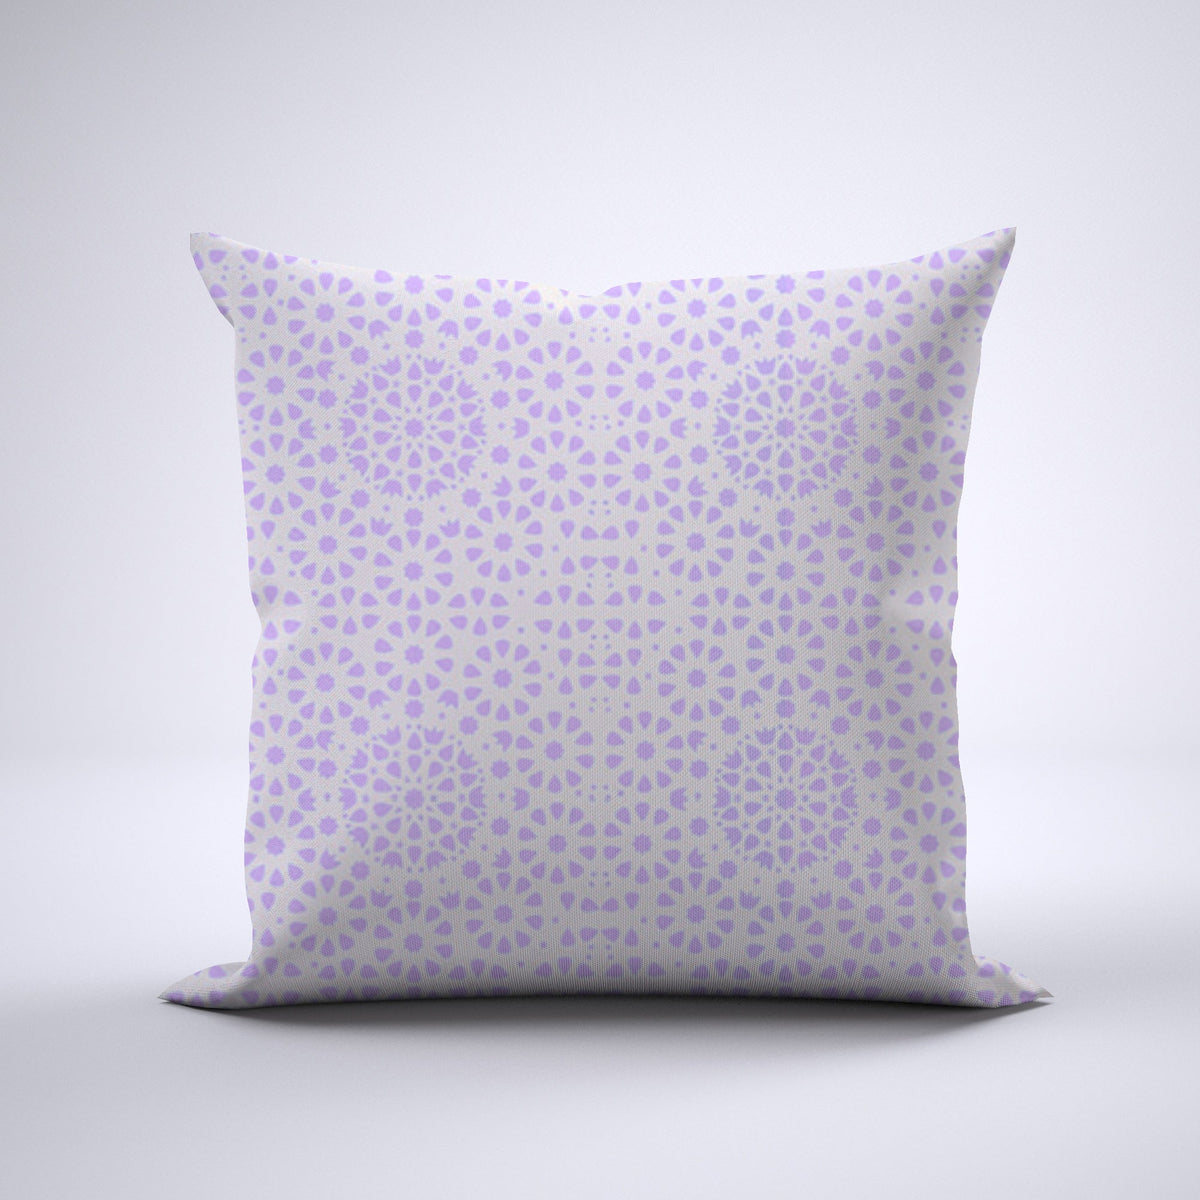 Throw Pillow - Charlotte Lilac Bedding Collections, Pillows, Throw Pillows MWW 